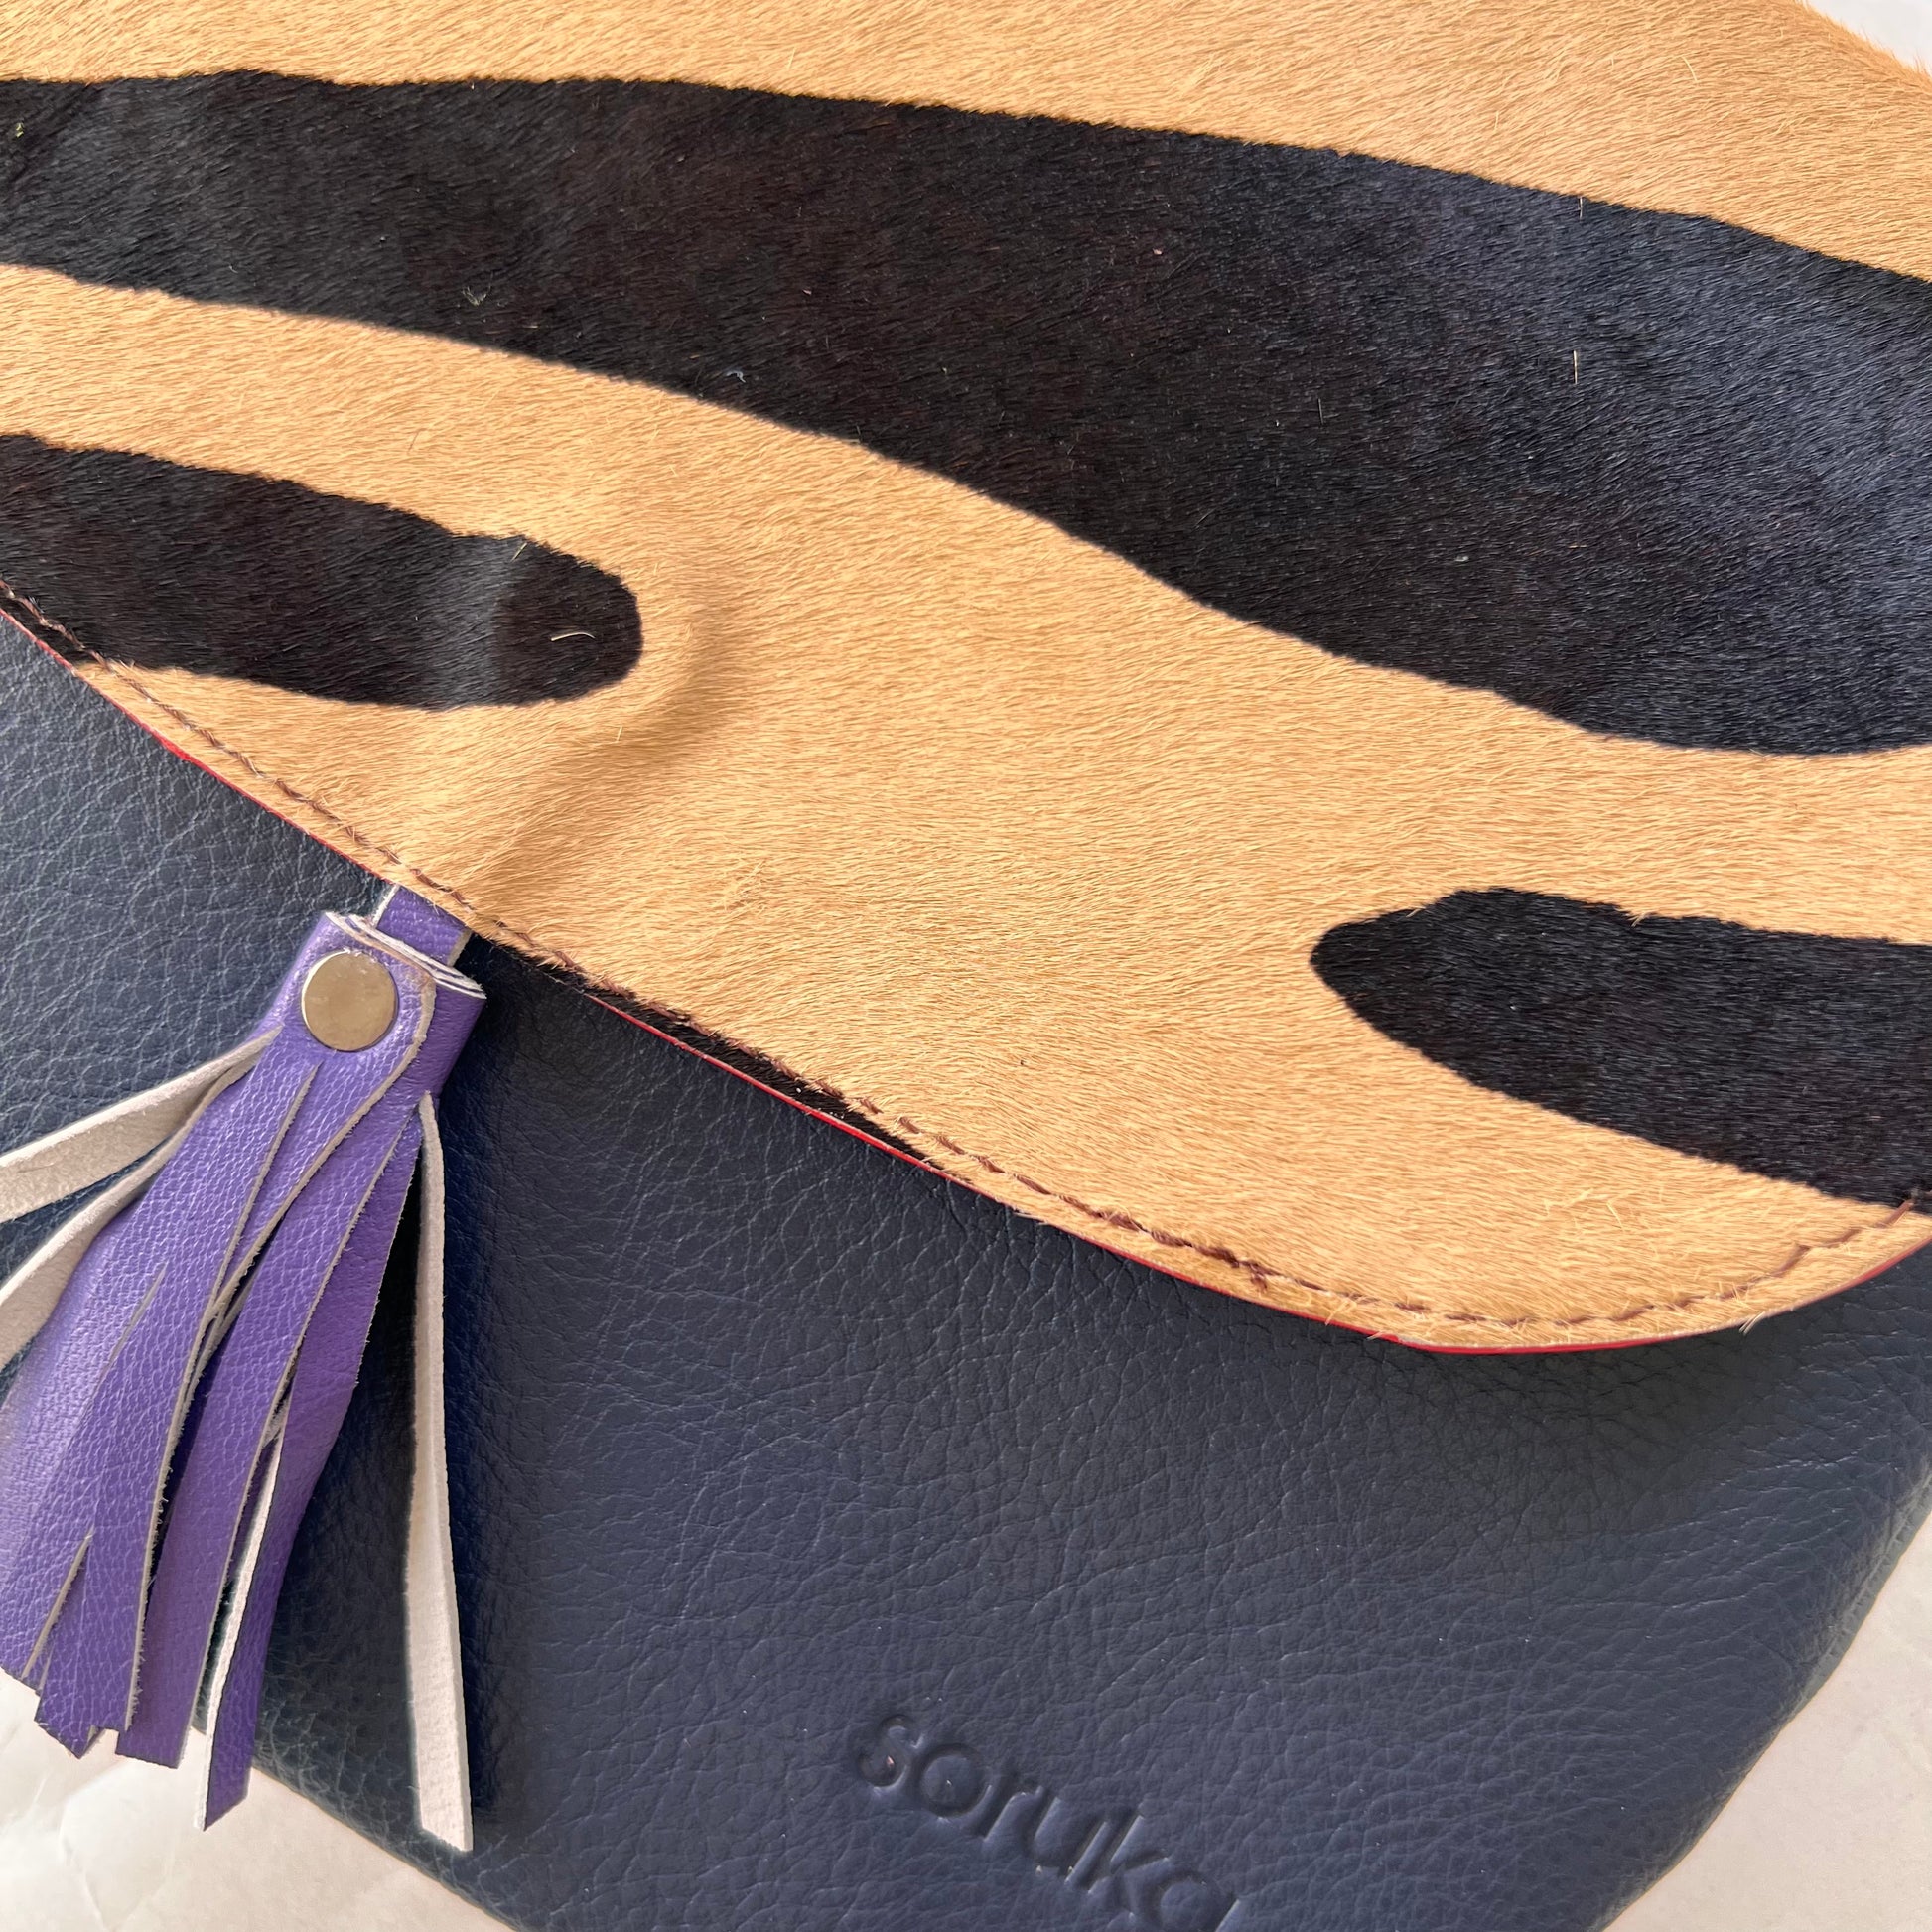 close-up of lola bag with animal print hair-on-hide flap with purple tassel over a navy body.